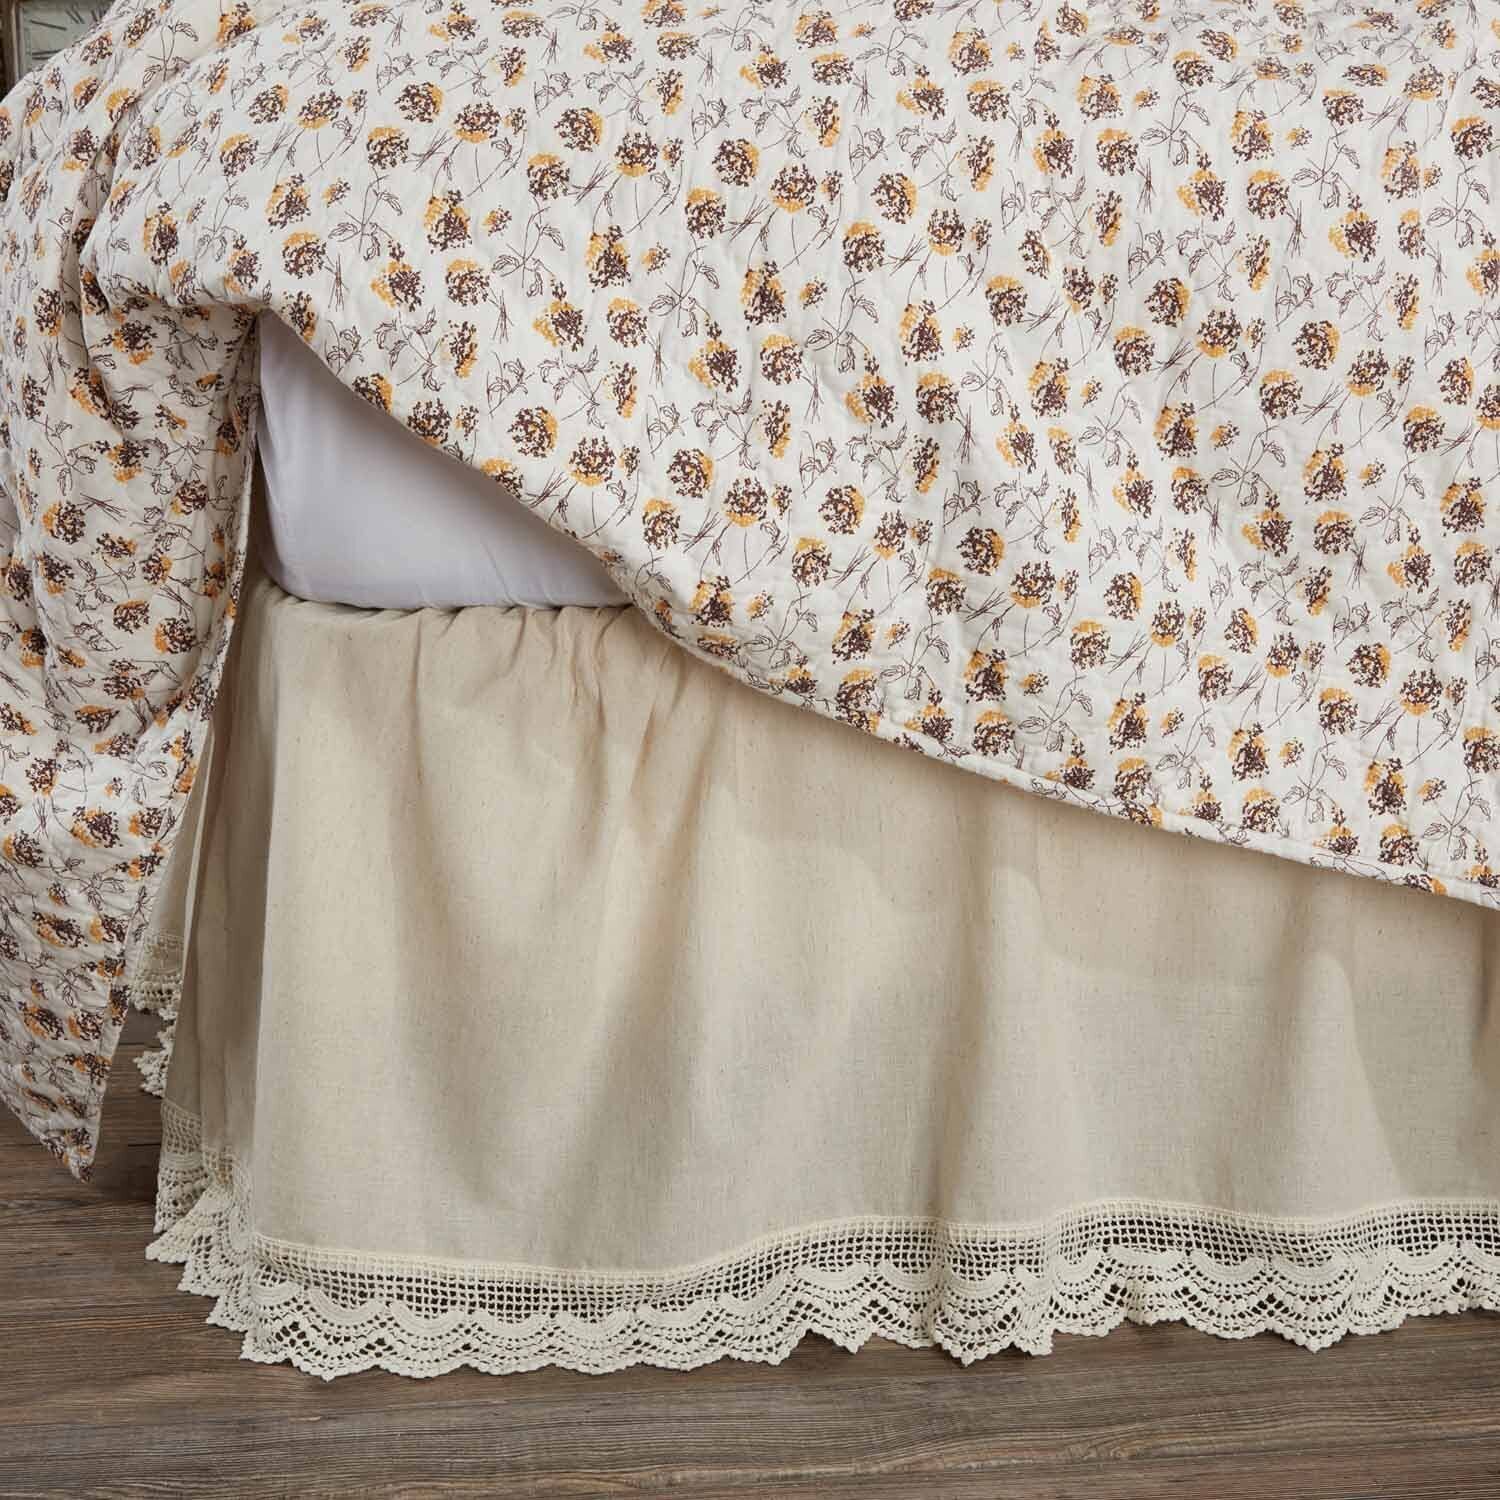 Crochet bed skirt in a different color